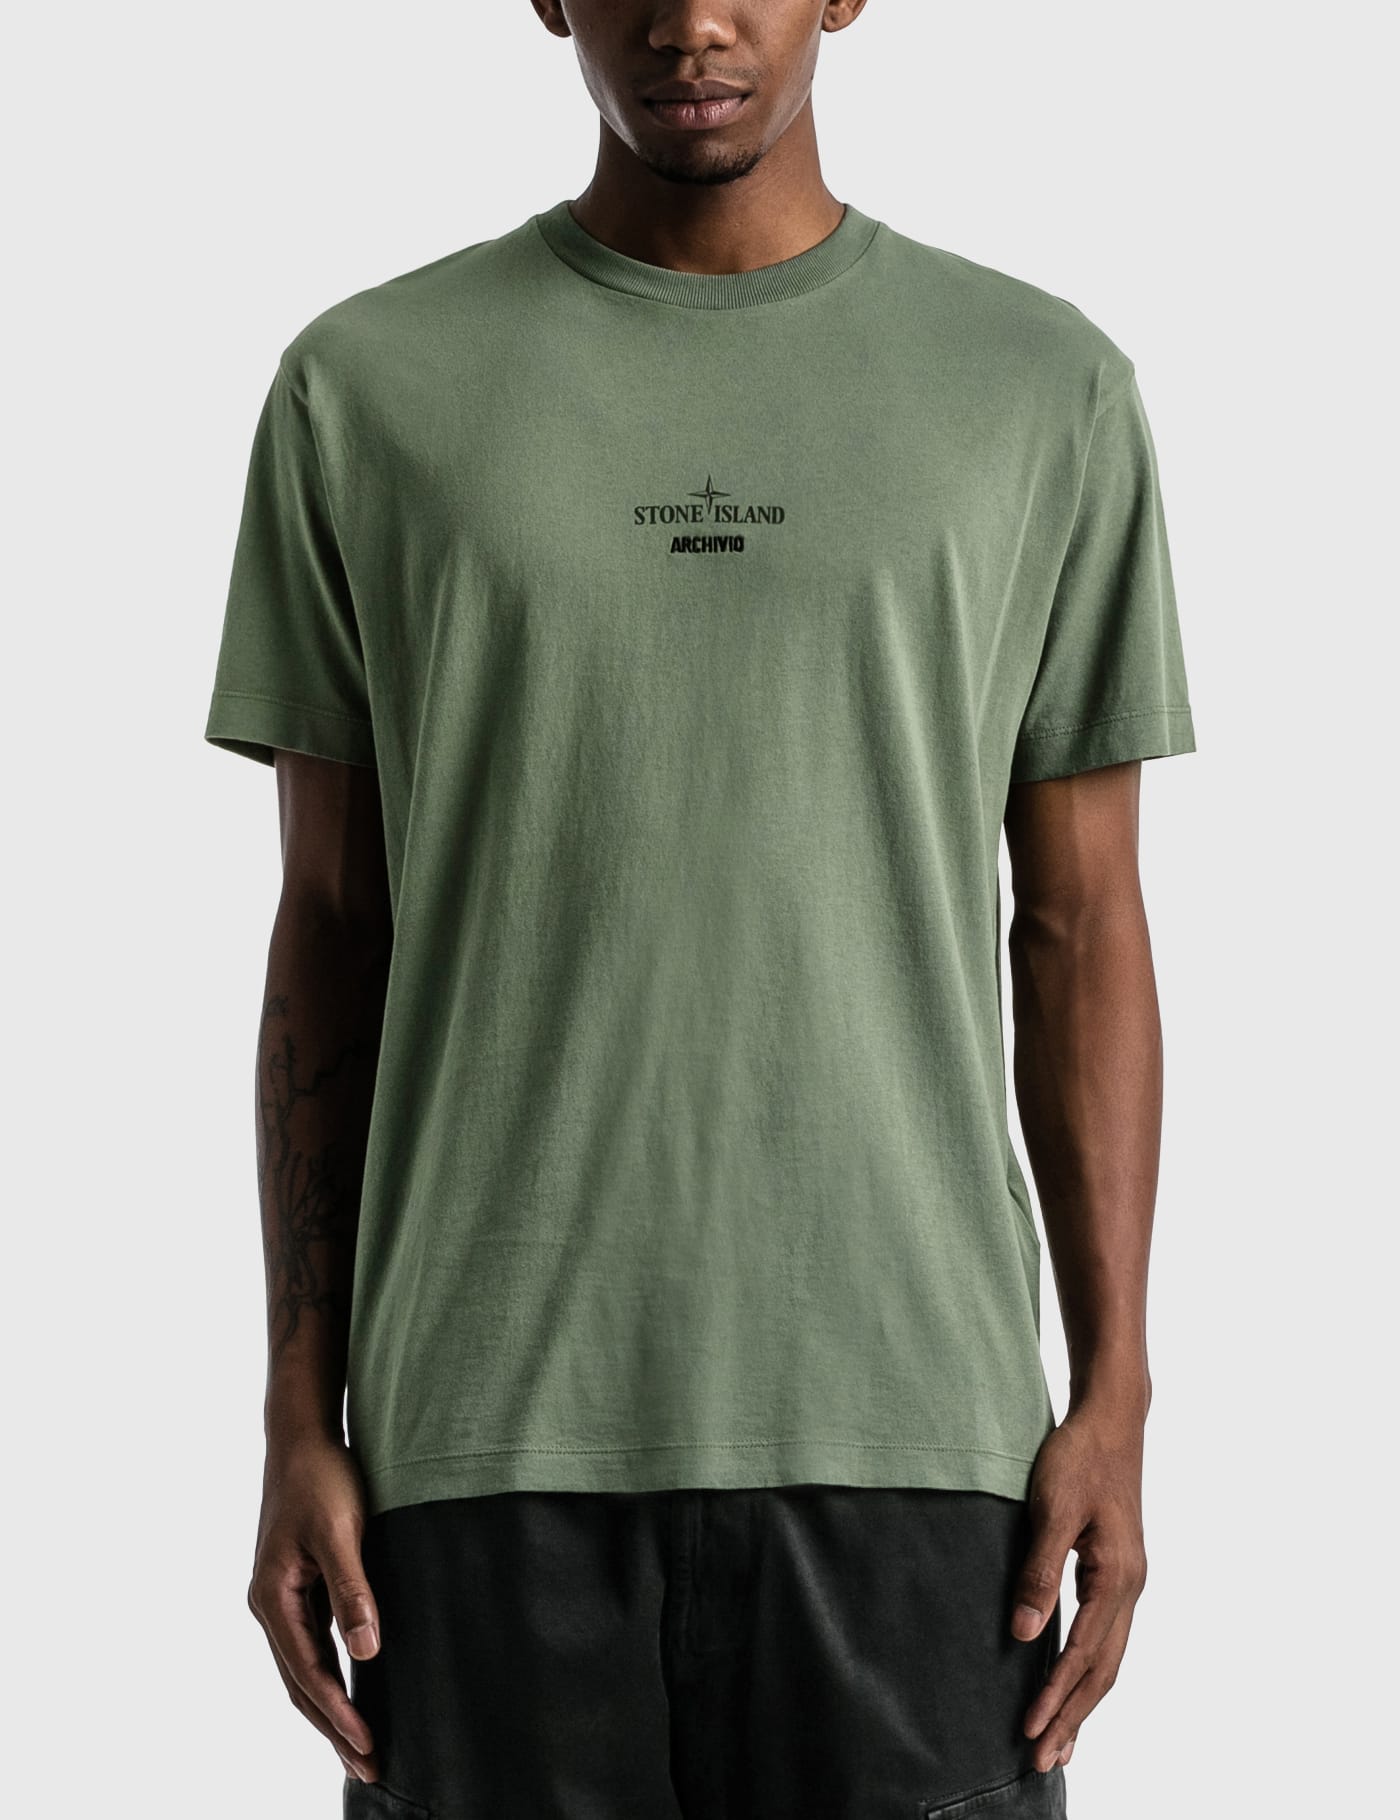 Stone Island - Archive Print T-shirt | HBX - Globally Curated